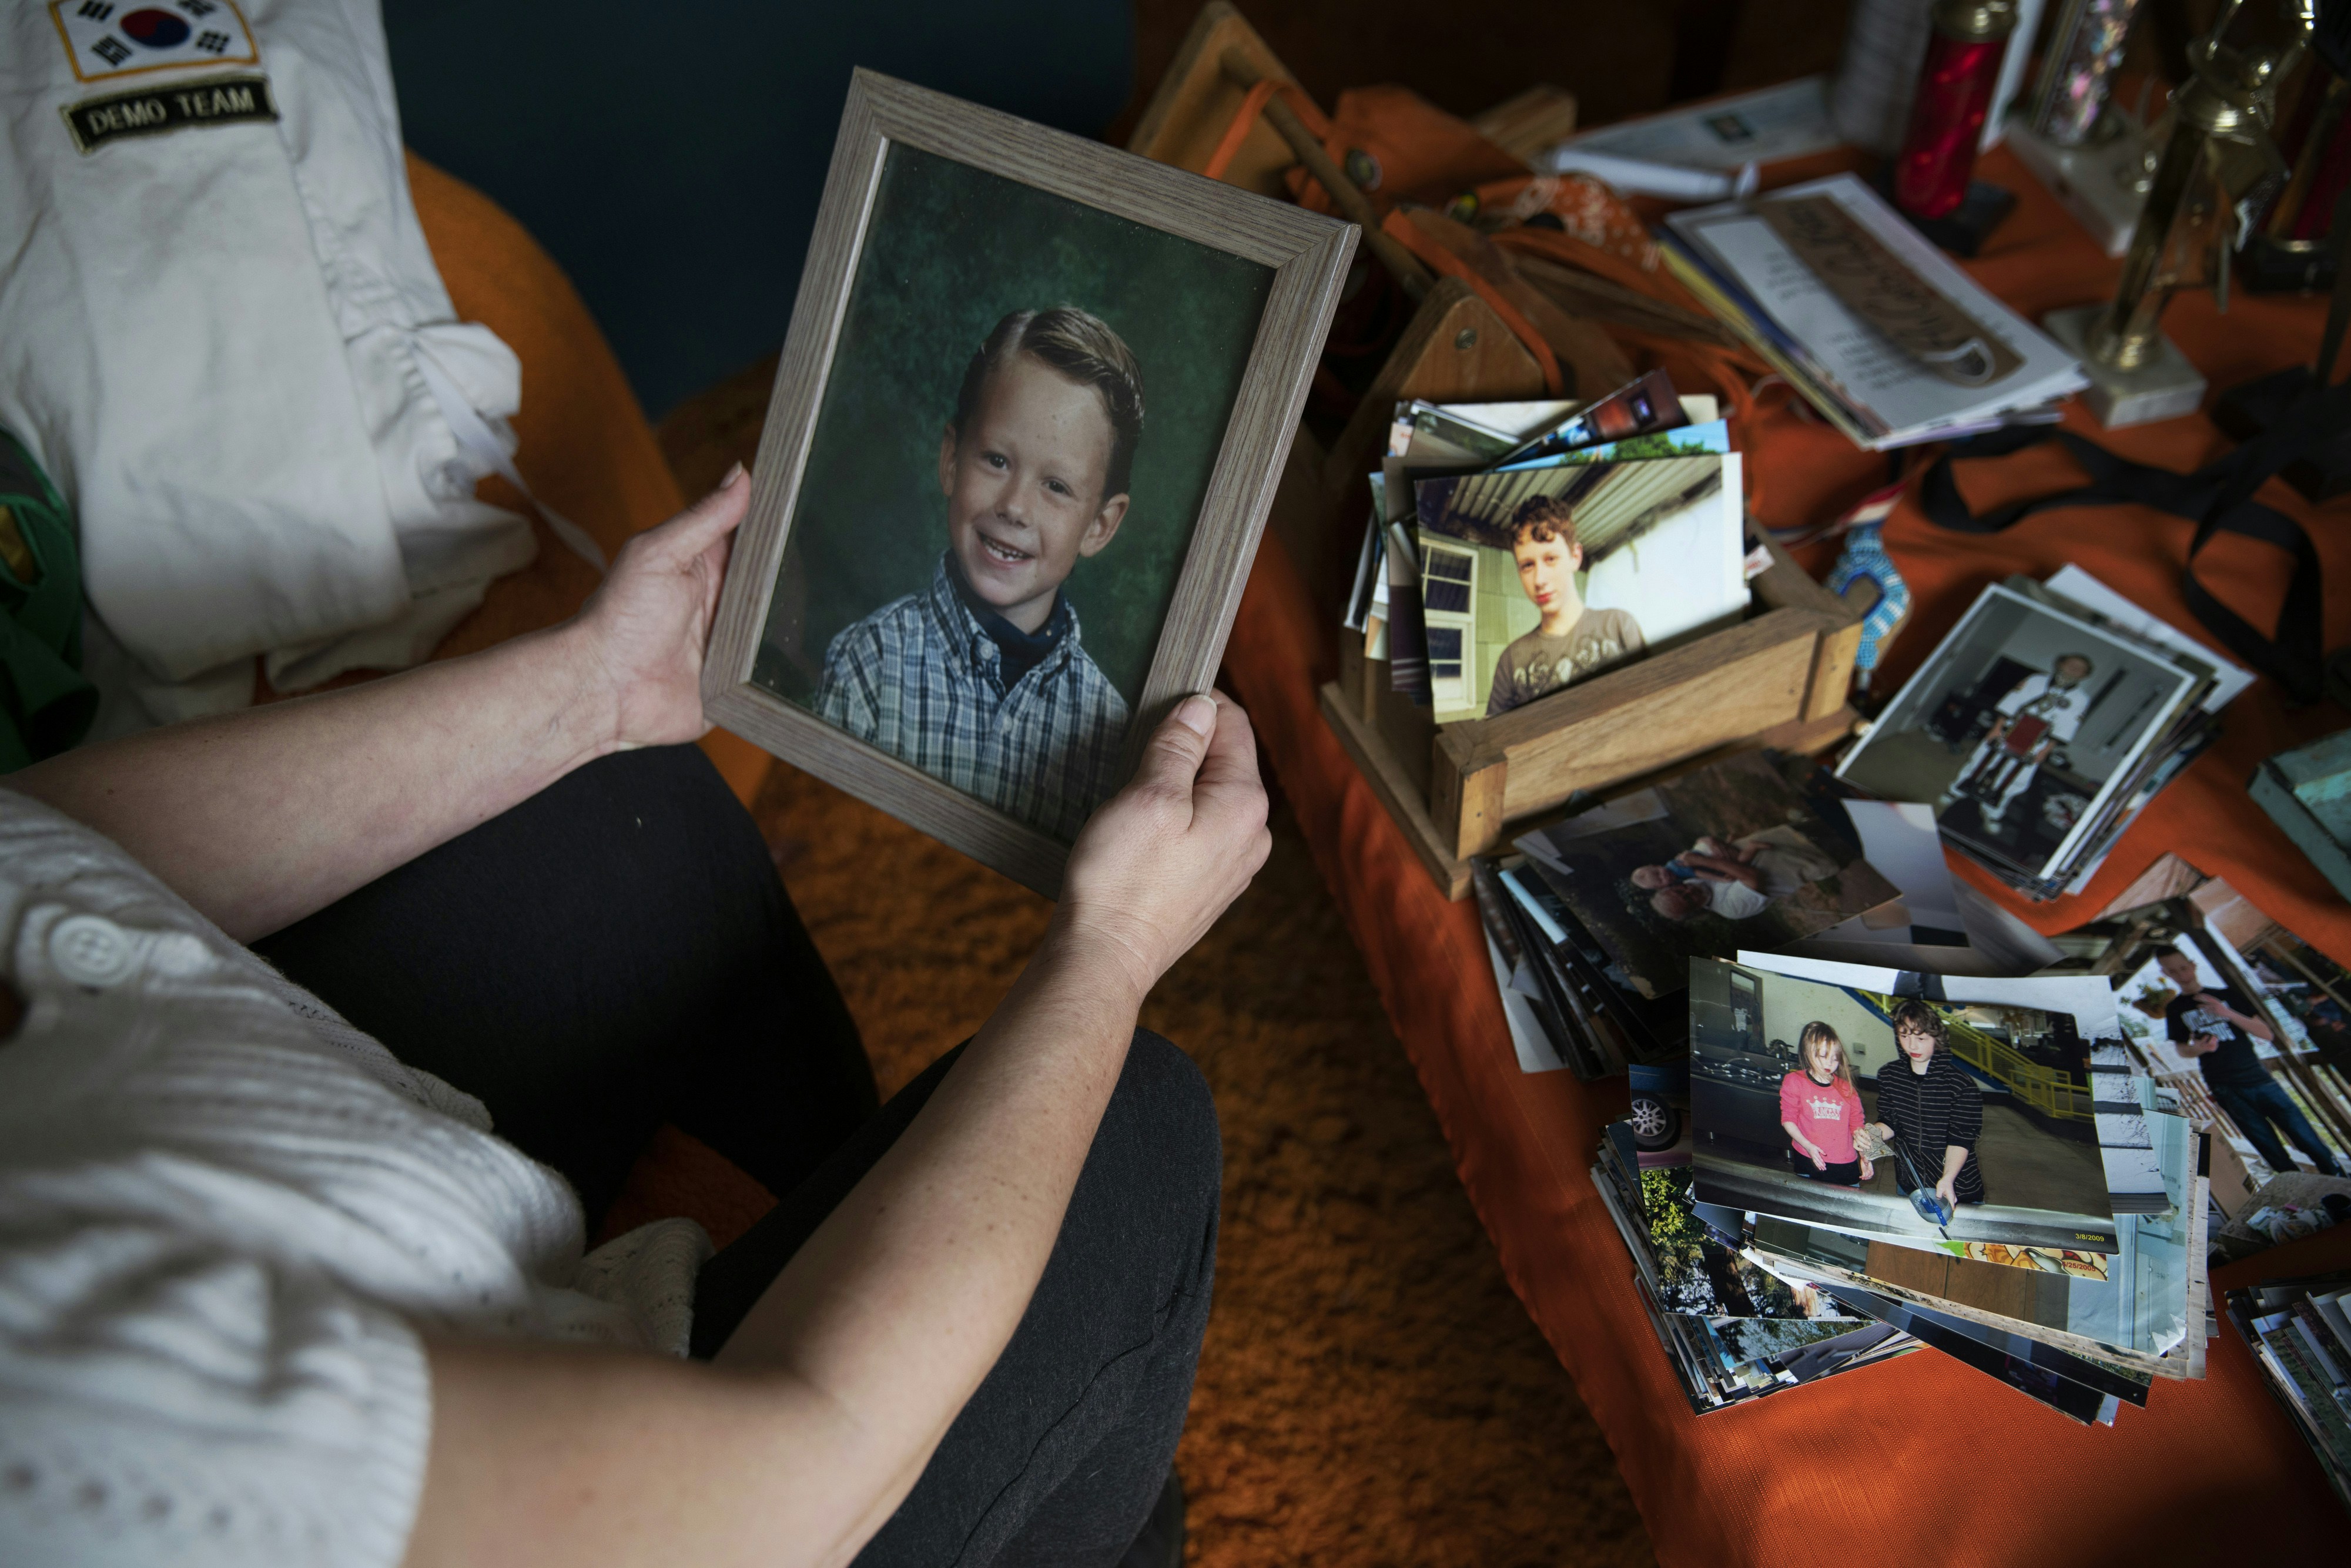 Laura Kealiher holds a childhood photo of her son Sean Kealiher, a Portland anti-facist activist killed in 2019 when he was 23, at her home in Portland, Oregon, on January 30, 2021. Brooke Herbert for The Intercept